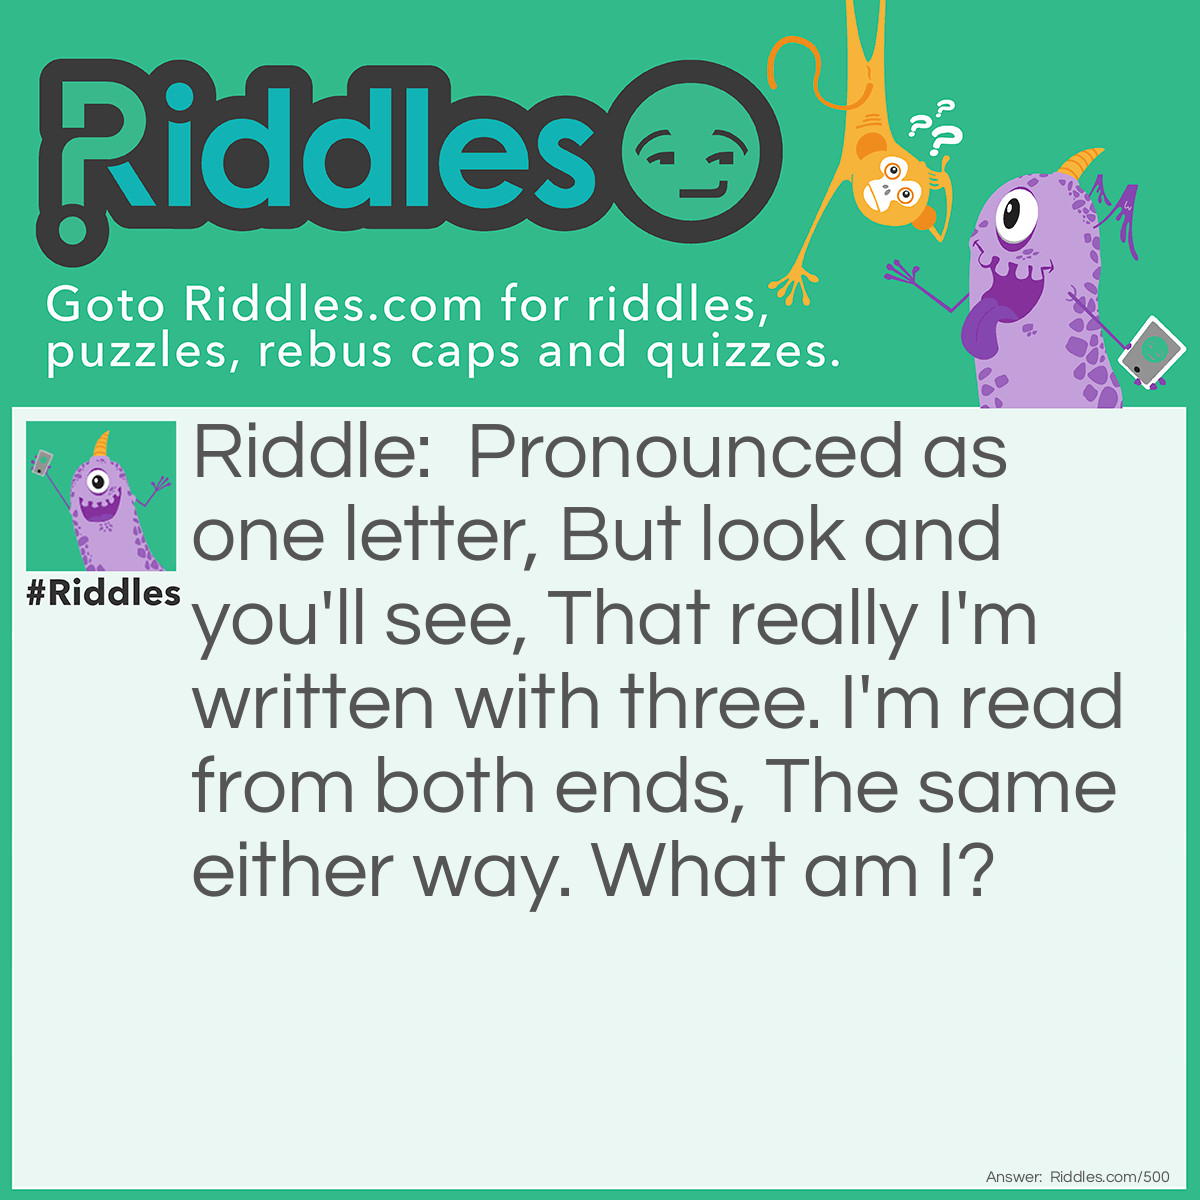 Riddle: Pronounced as one letter, But look and you'll see, That really I'm written with three. I'm read from both ends, The same either way. 
What am I? Answer: I am an eye, or an ewe.